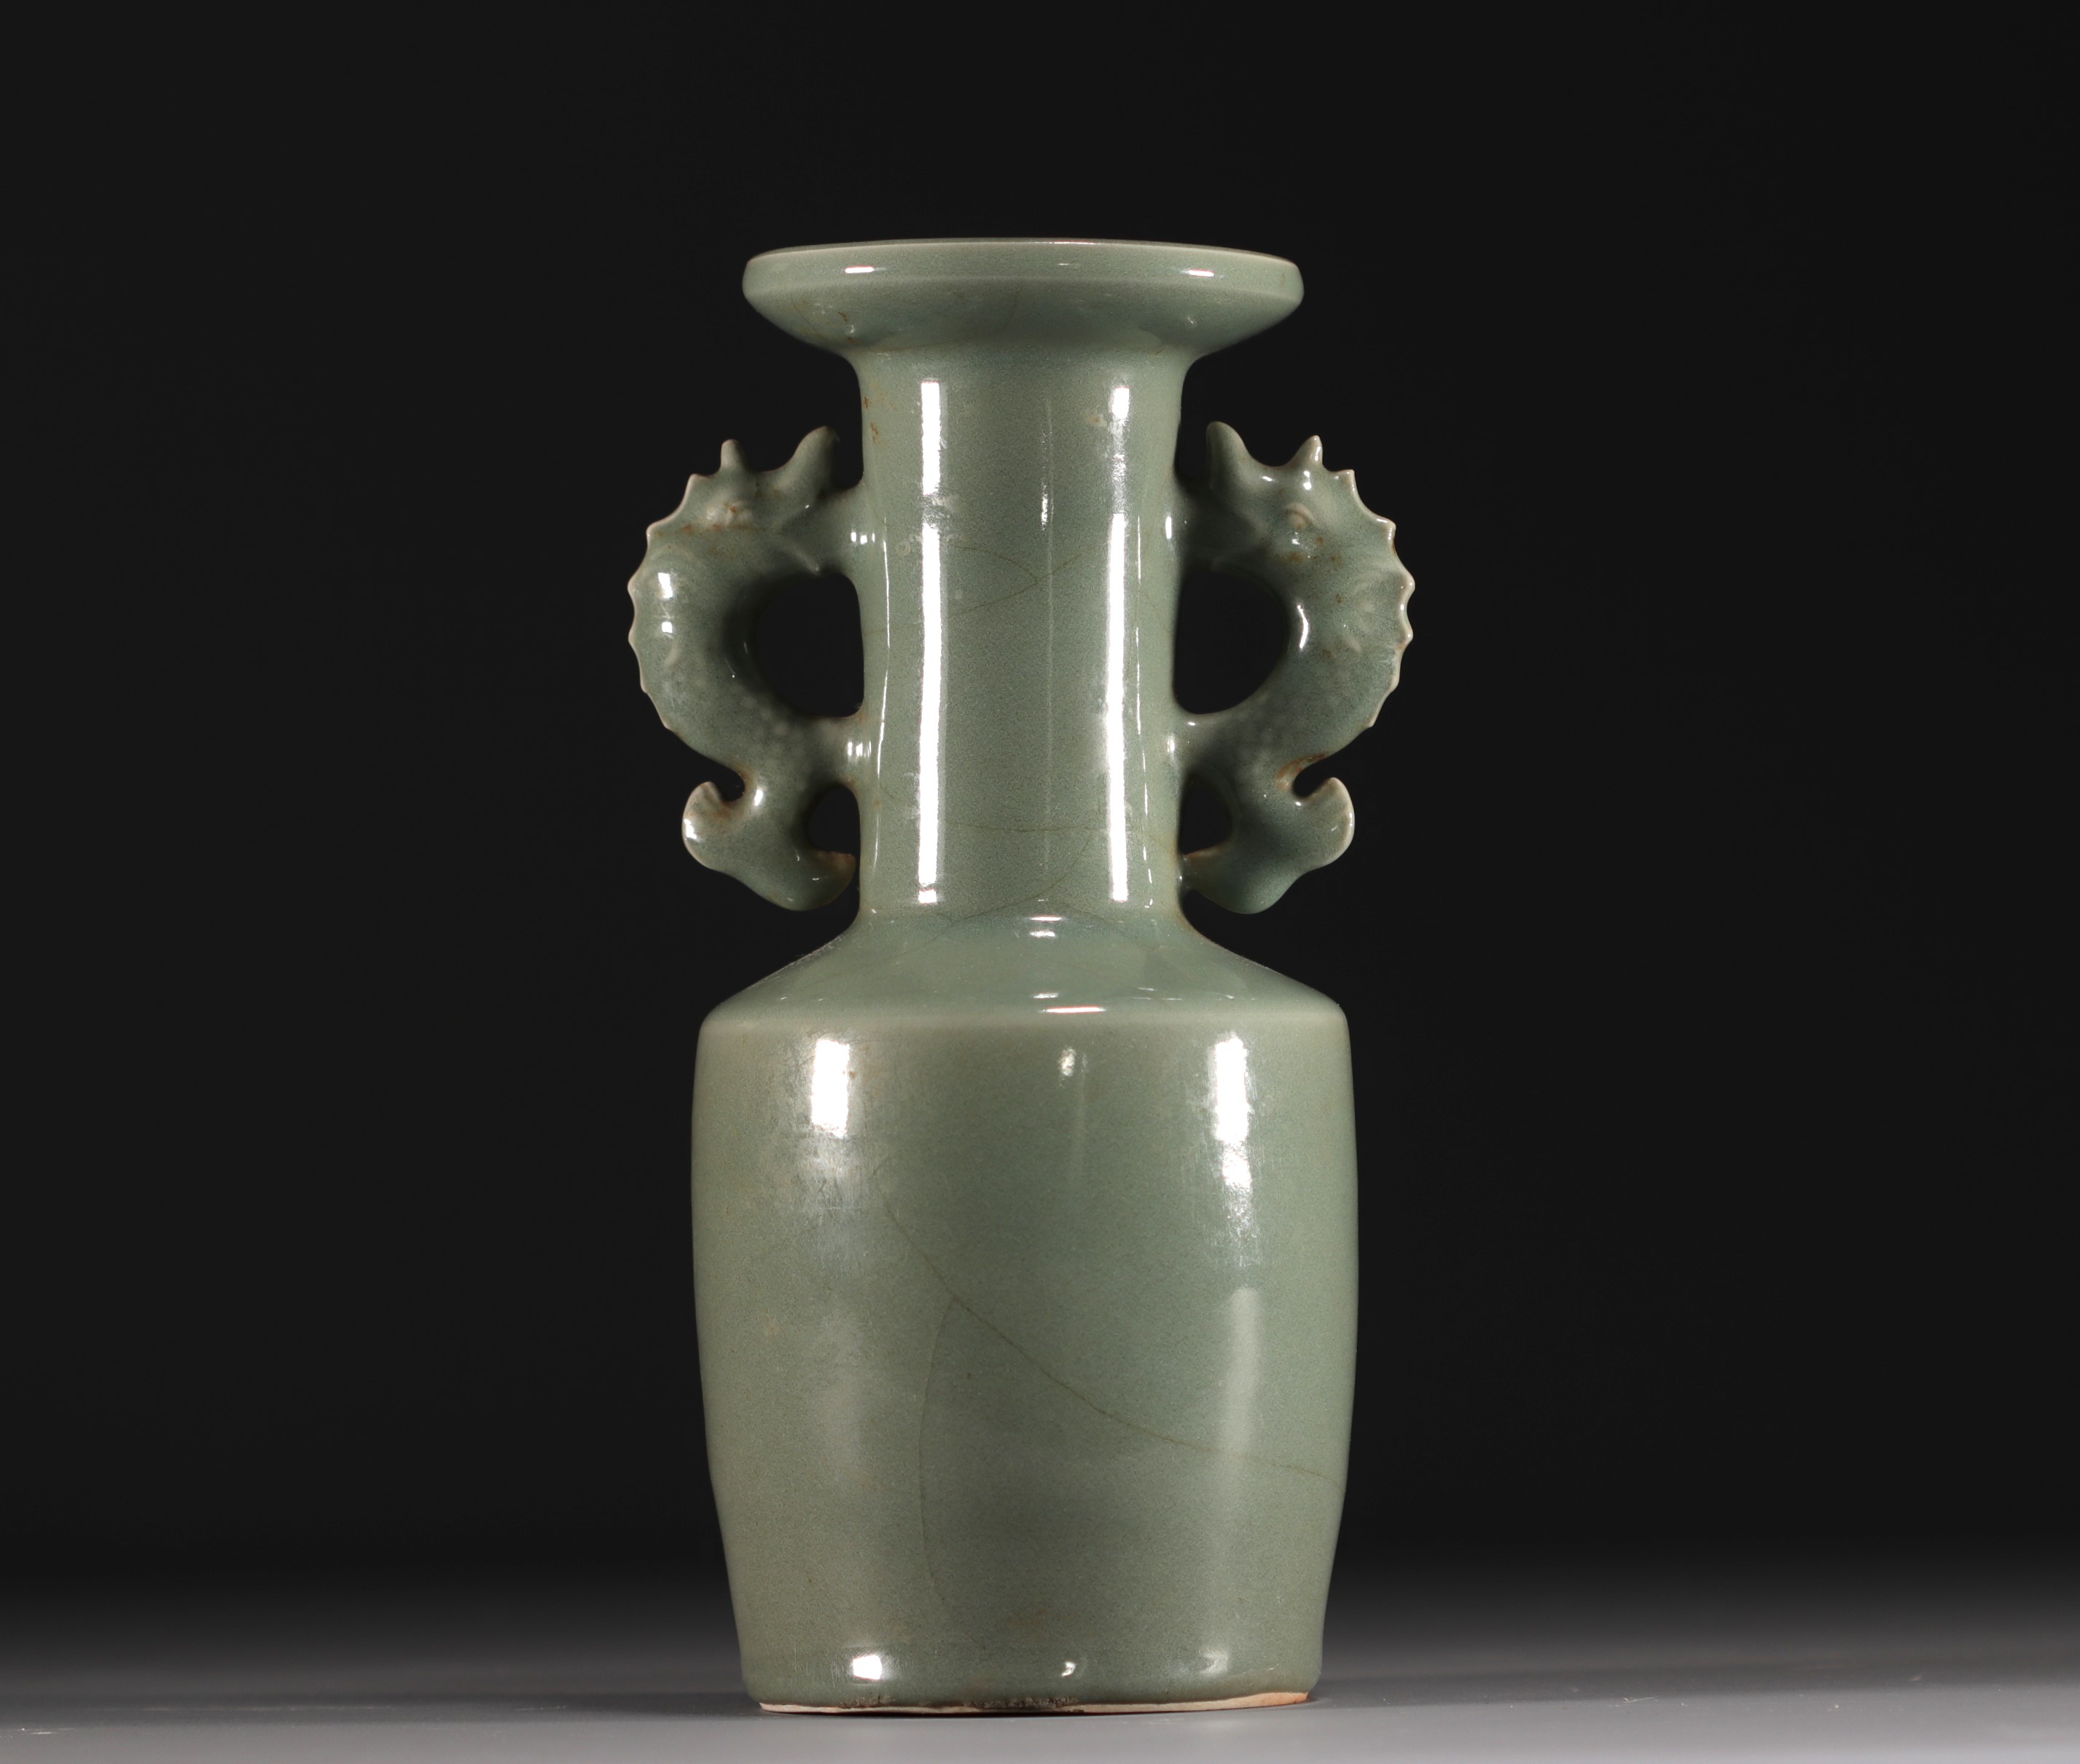 China - A green-glazed monochrome porcelain vase with fish-shaped handles, Qing period. - Image 3 of 5